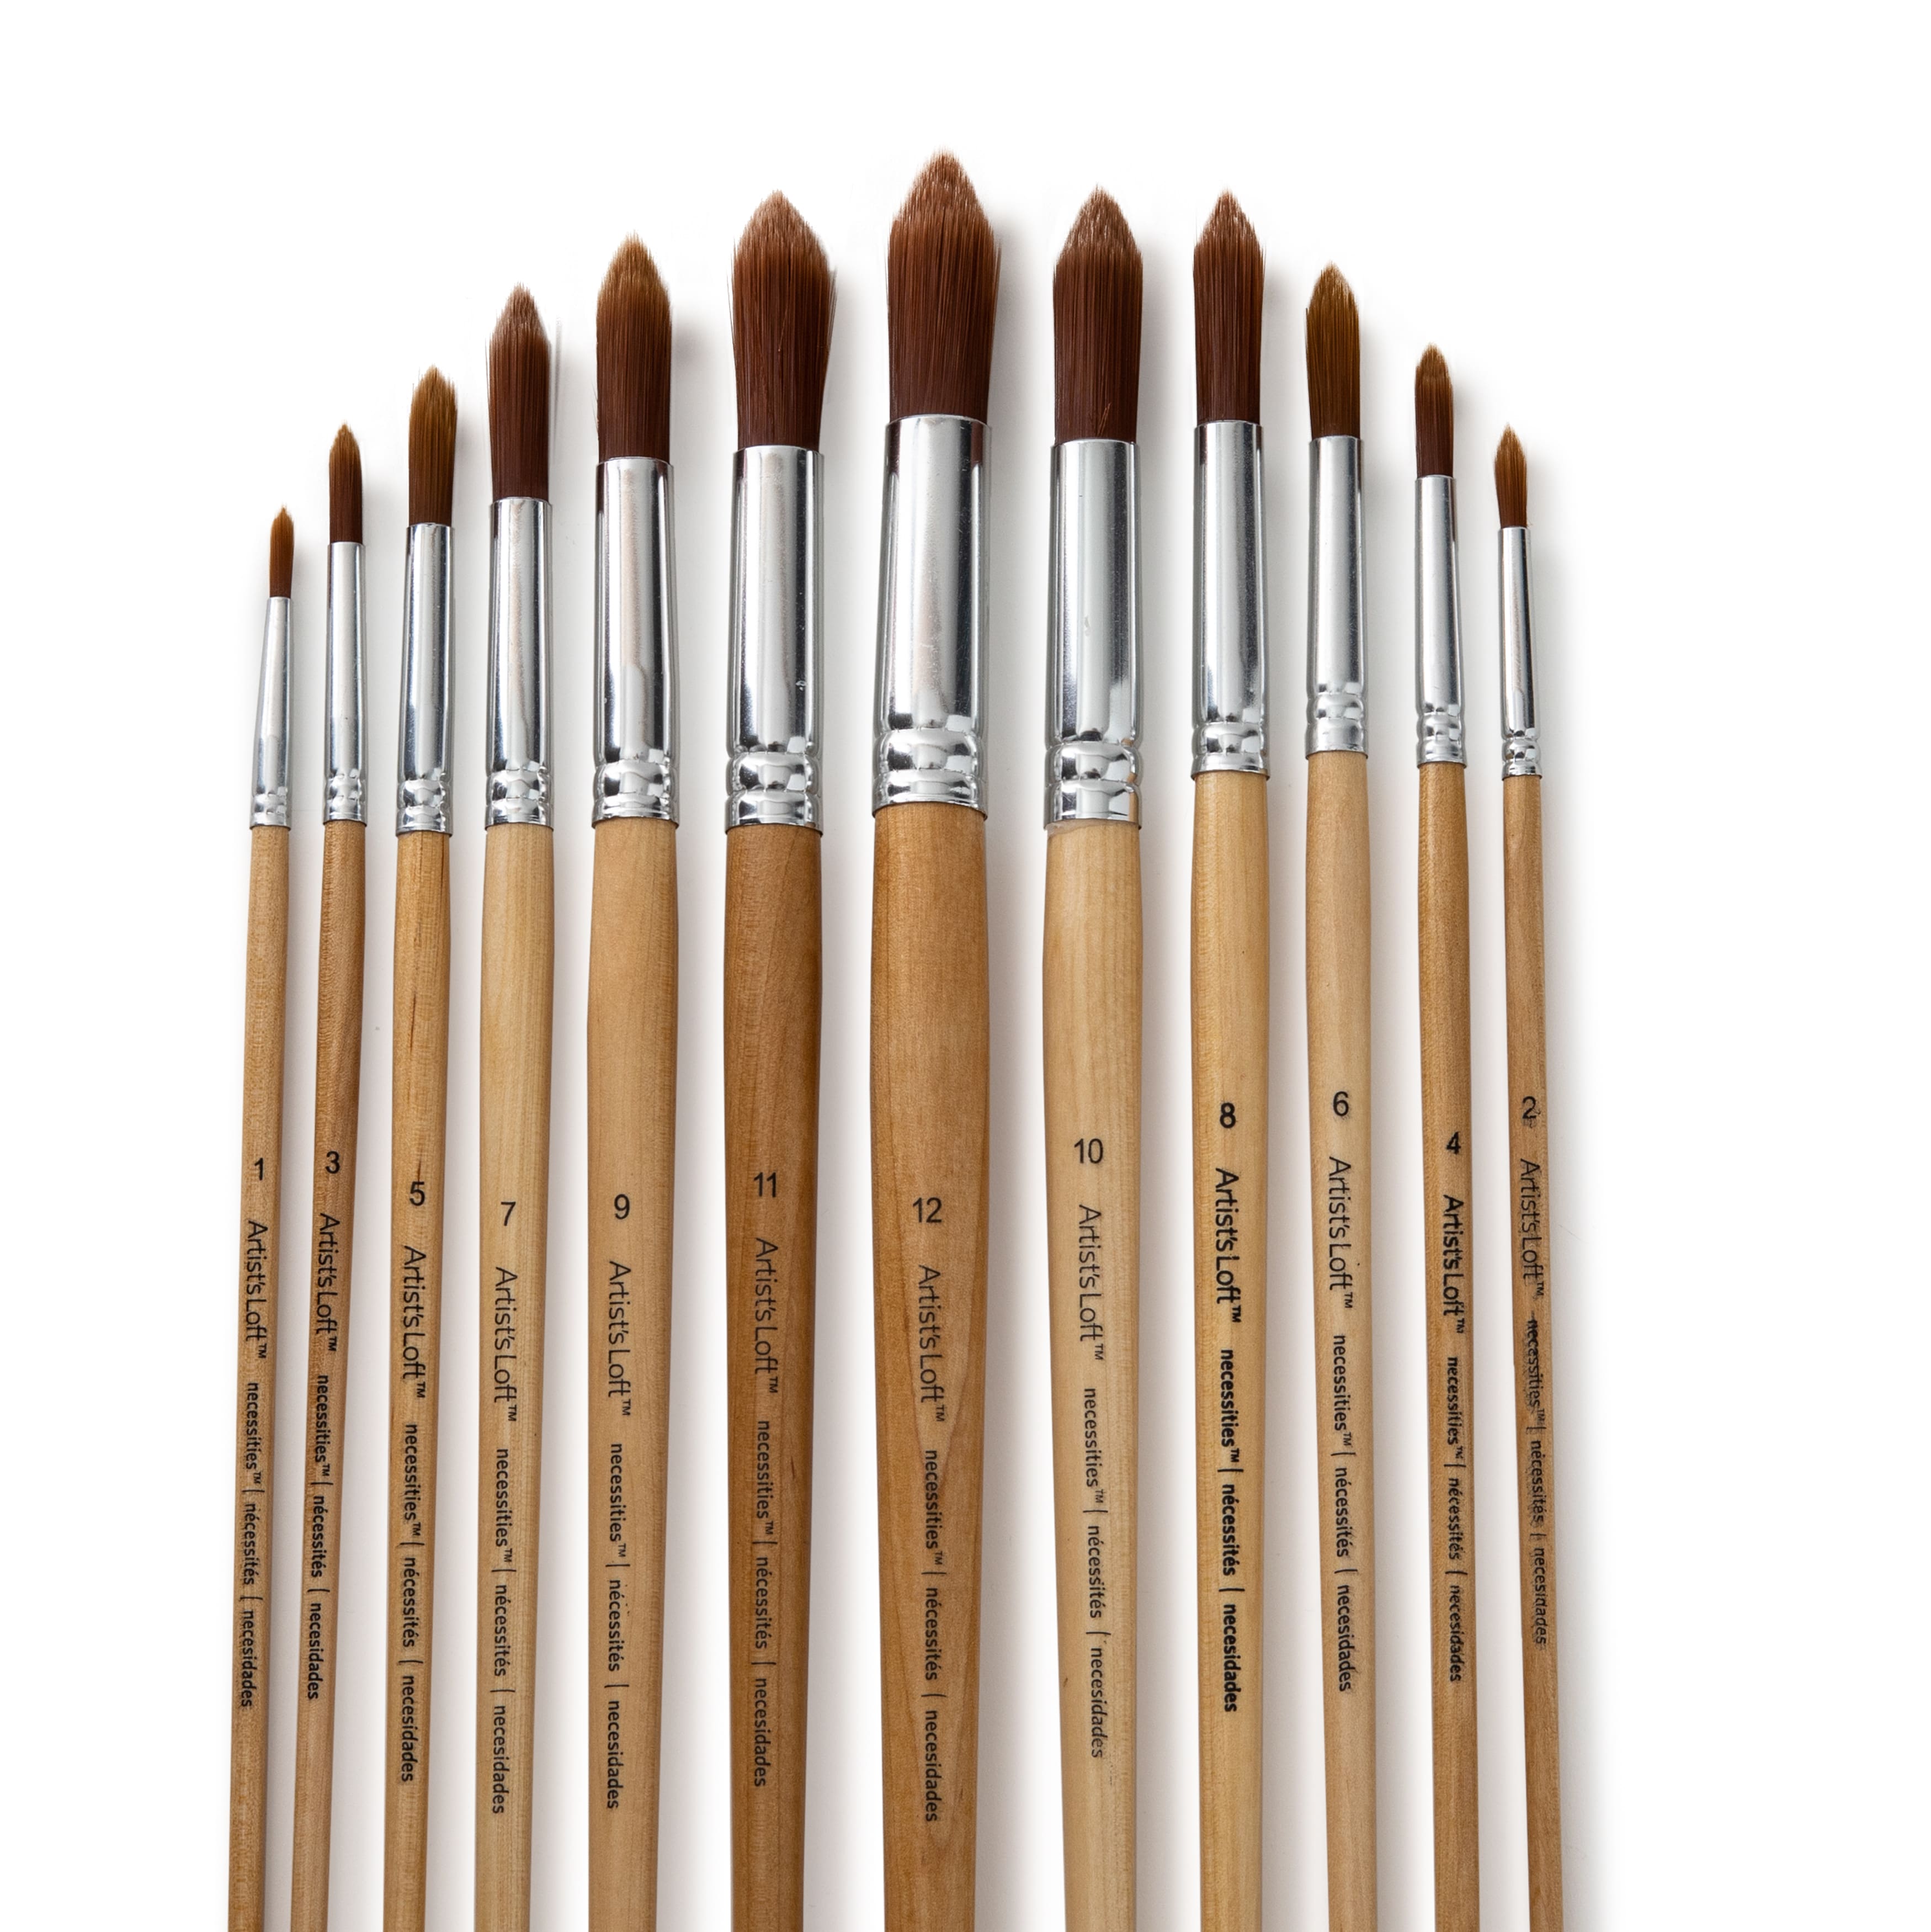 12 Packs: 10 Ct. (120 Total) Necessities Golden Synthetic Acrylic Brush Set by Artist's Loft, Size: 3.85 x 0.45 x 9.8, Black